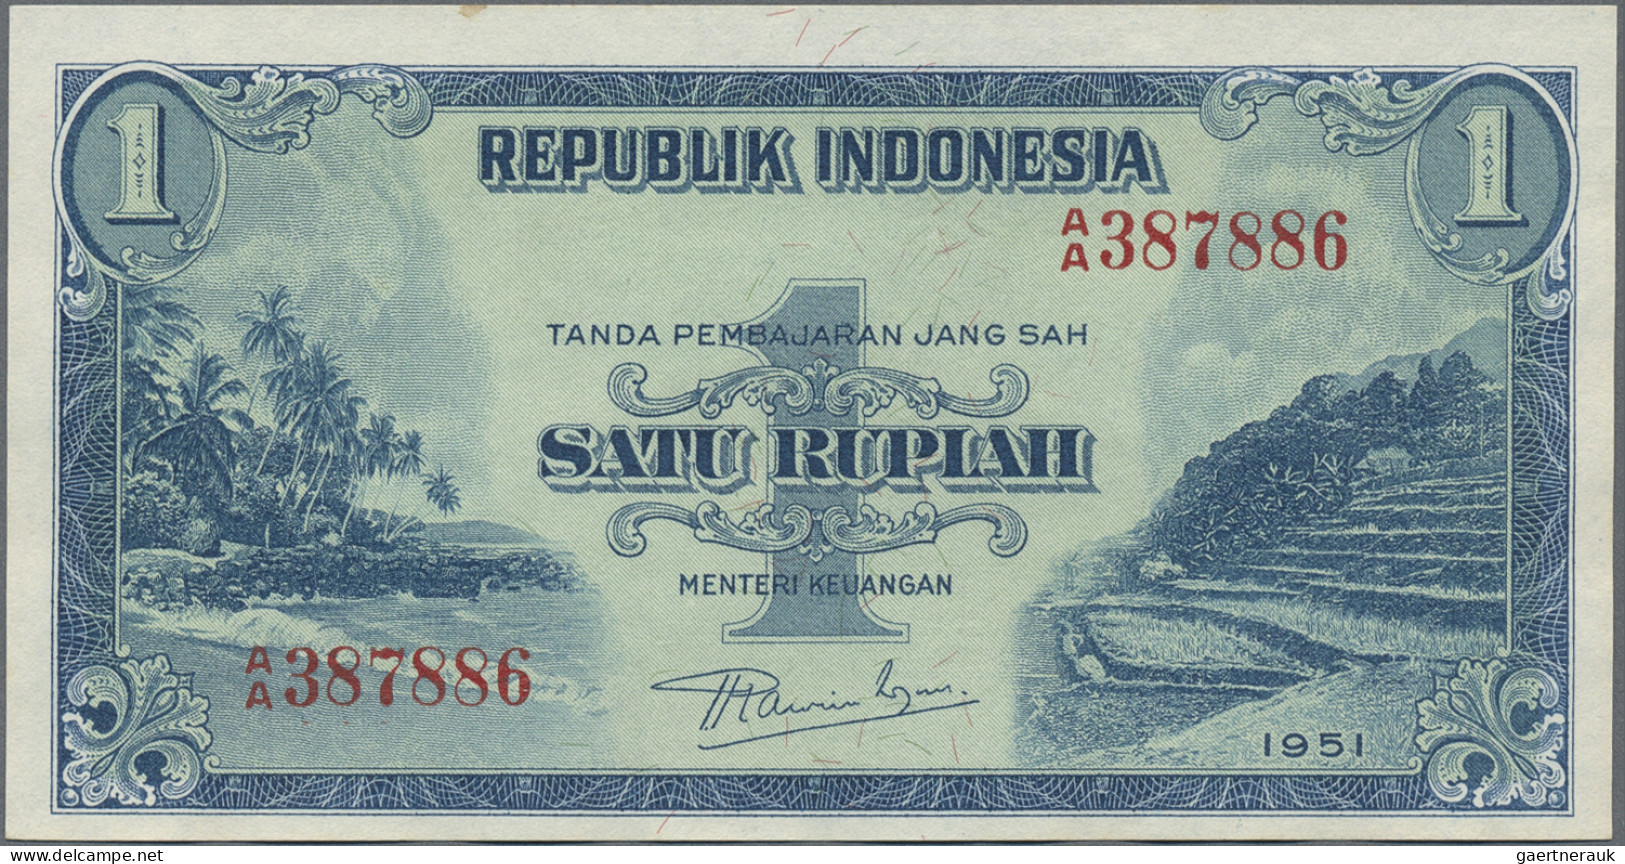 Indonesia: Republic Indonesia, Huge Lot With 17 Banknotes 1 And 2.5 Rupiah, Seri - Indonésie